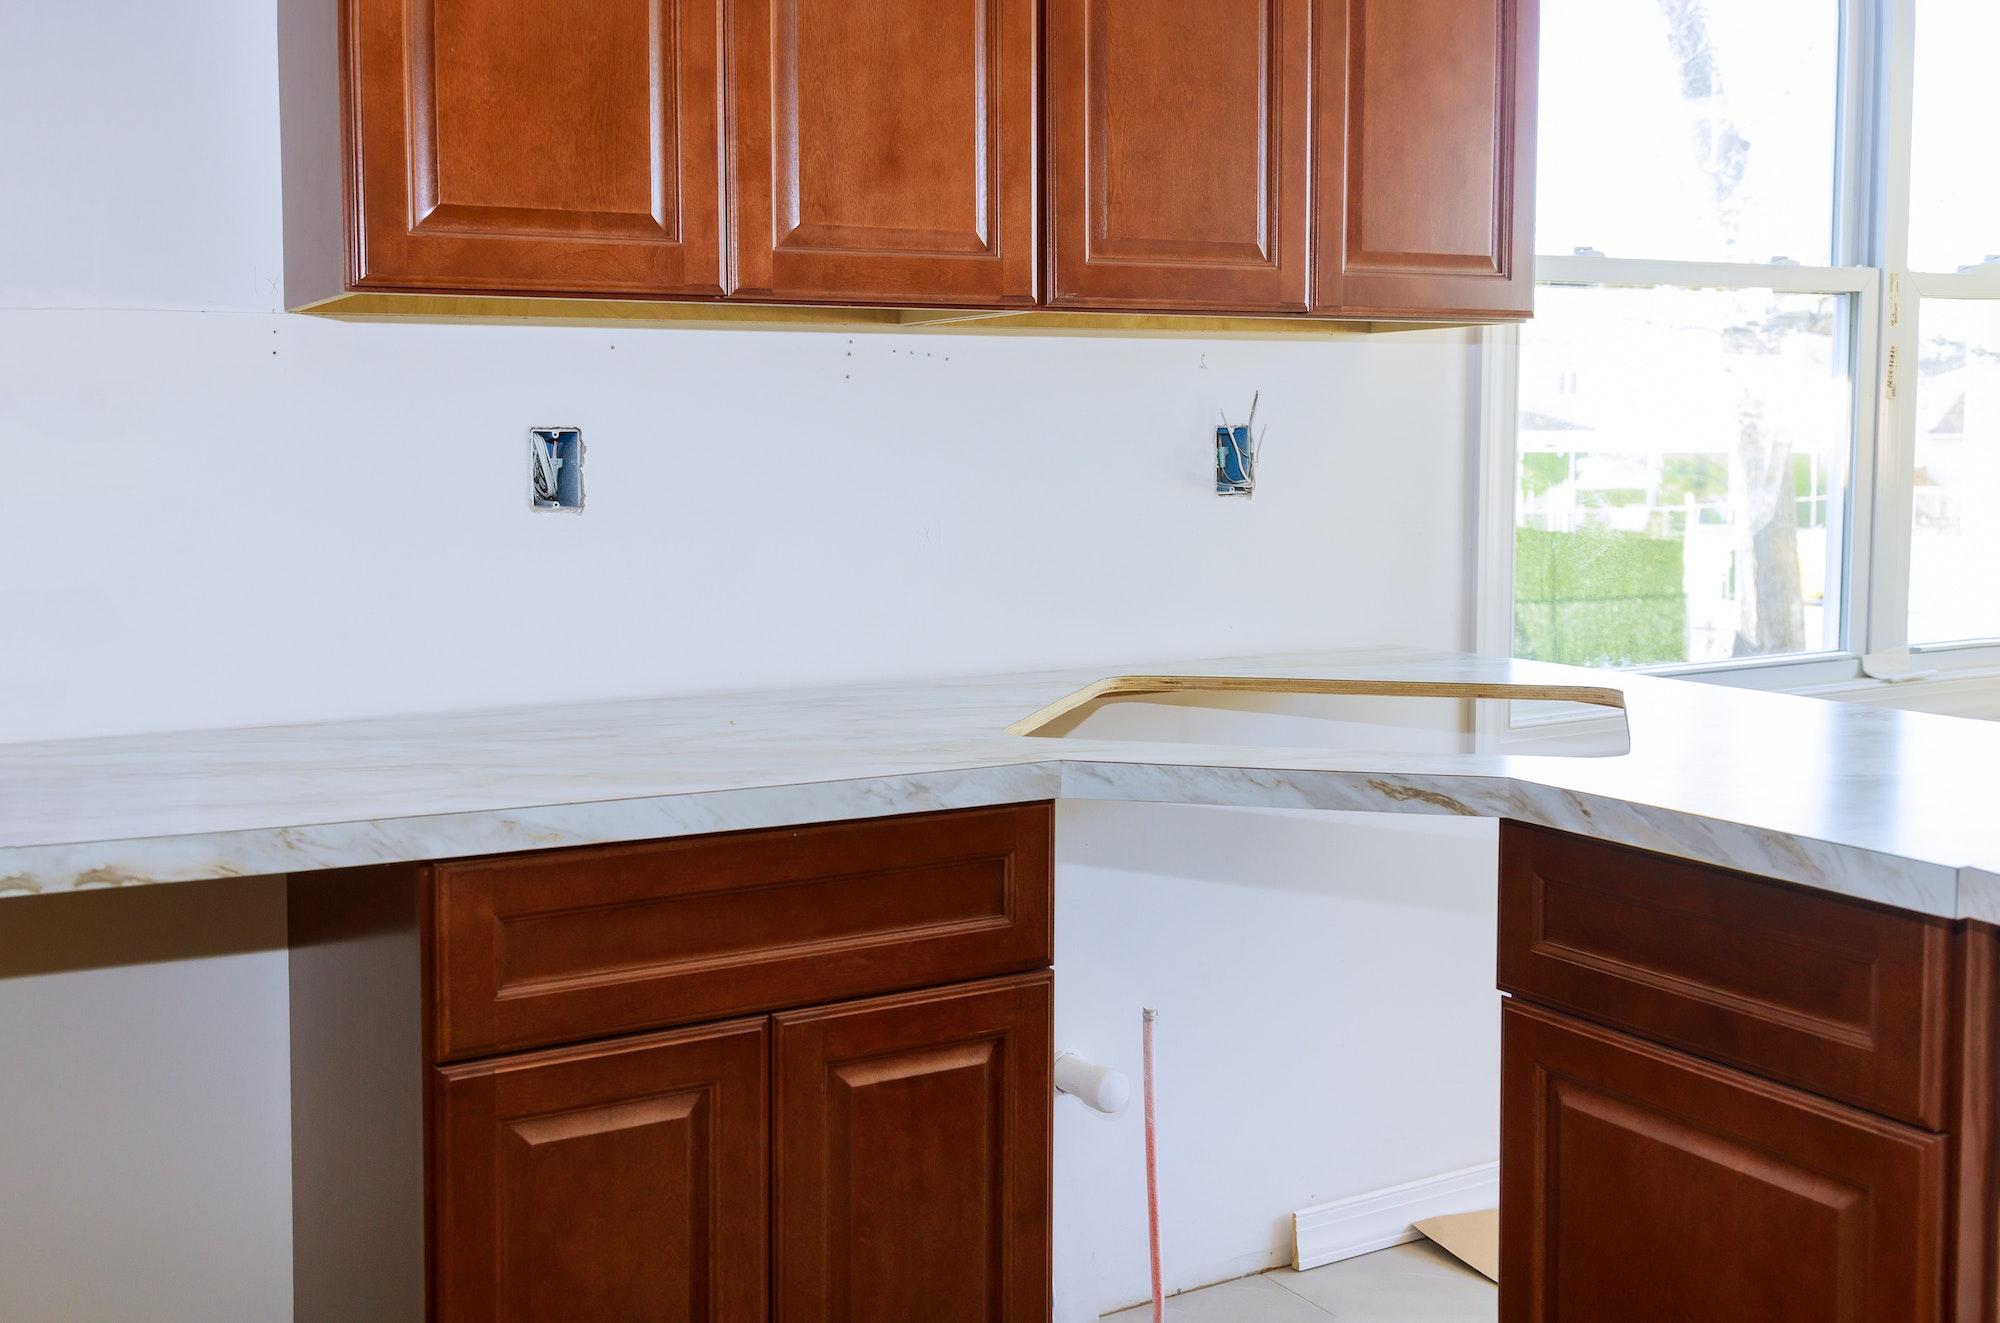 Installing new kitchen formica counter top is remodeling